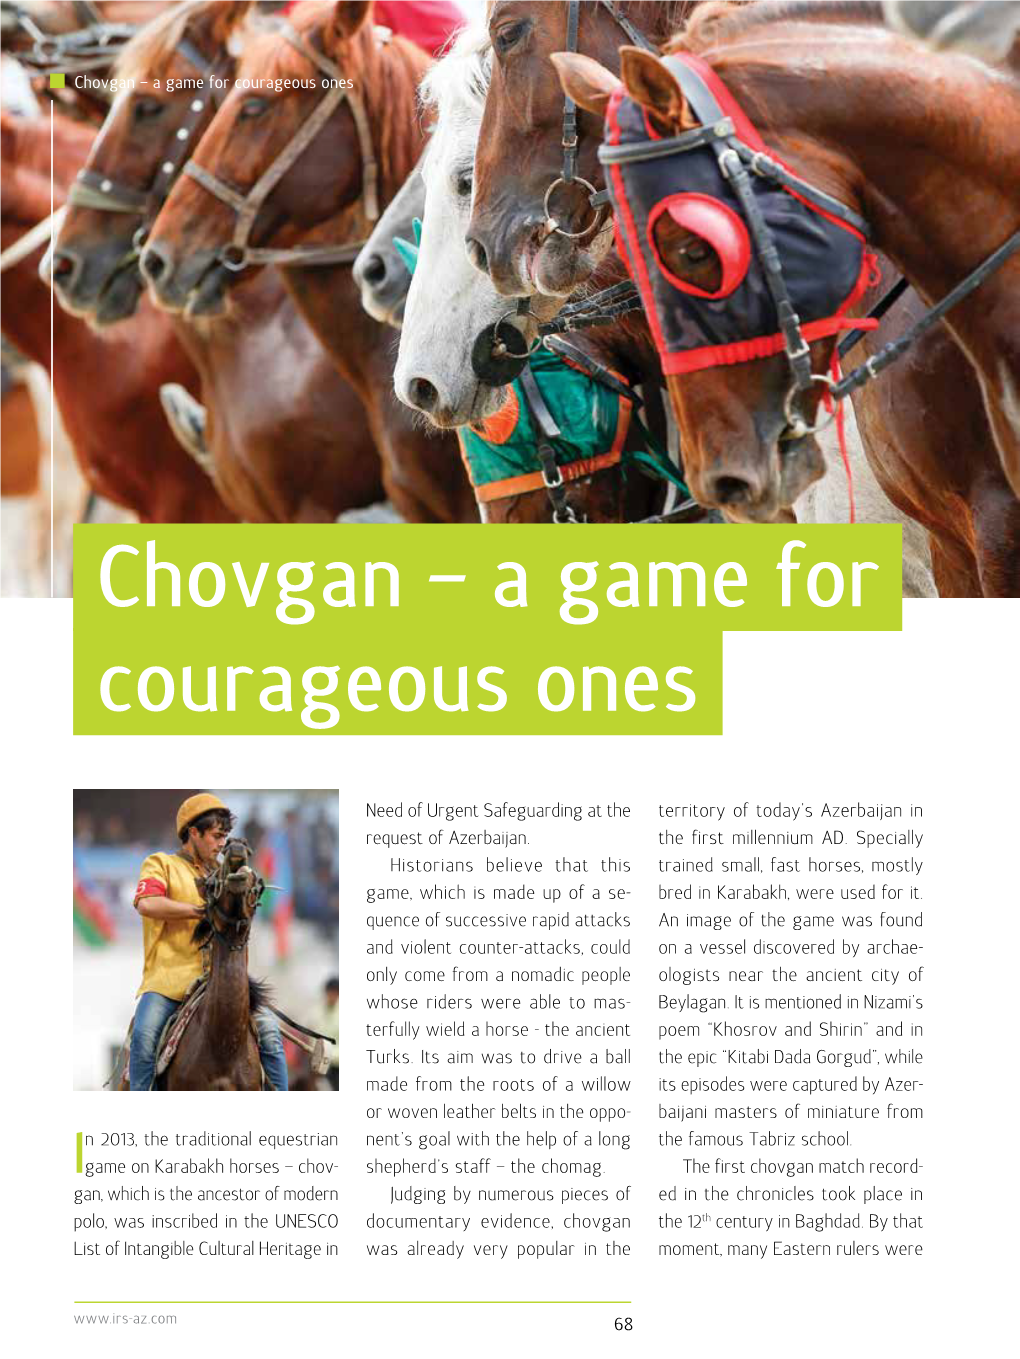 Chovgan – a Game for Courageous Ones